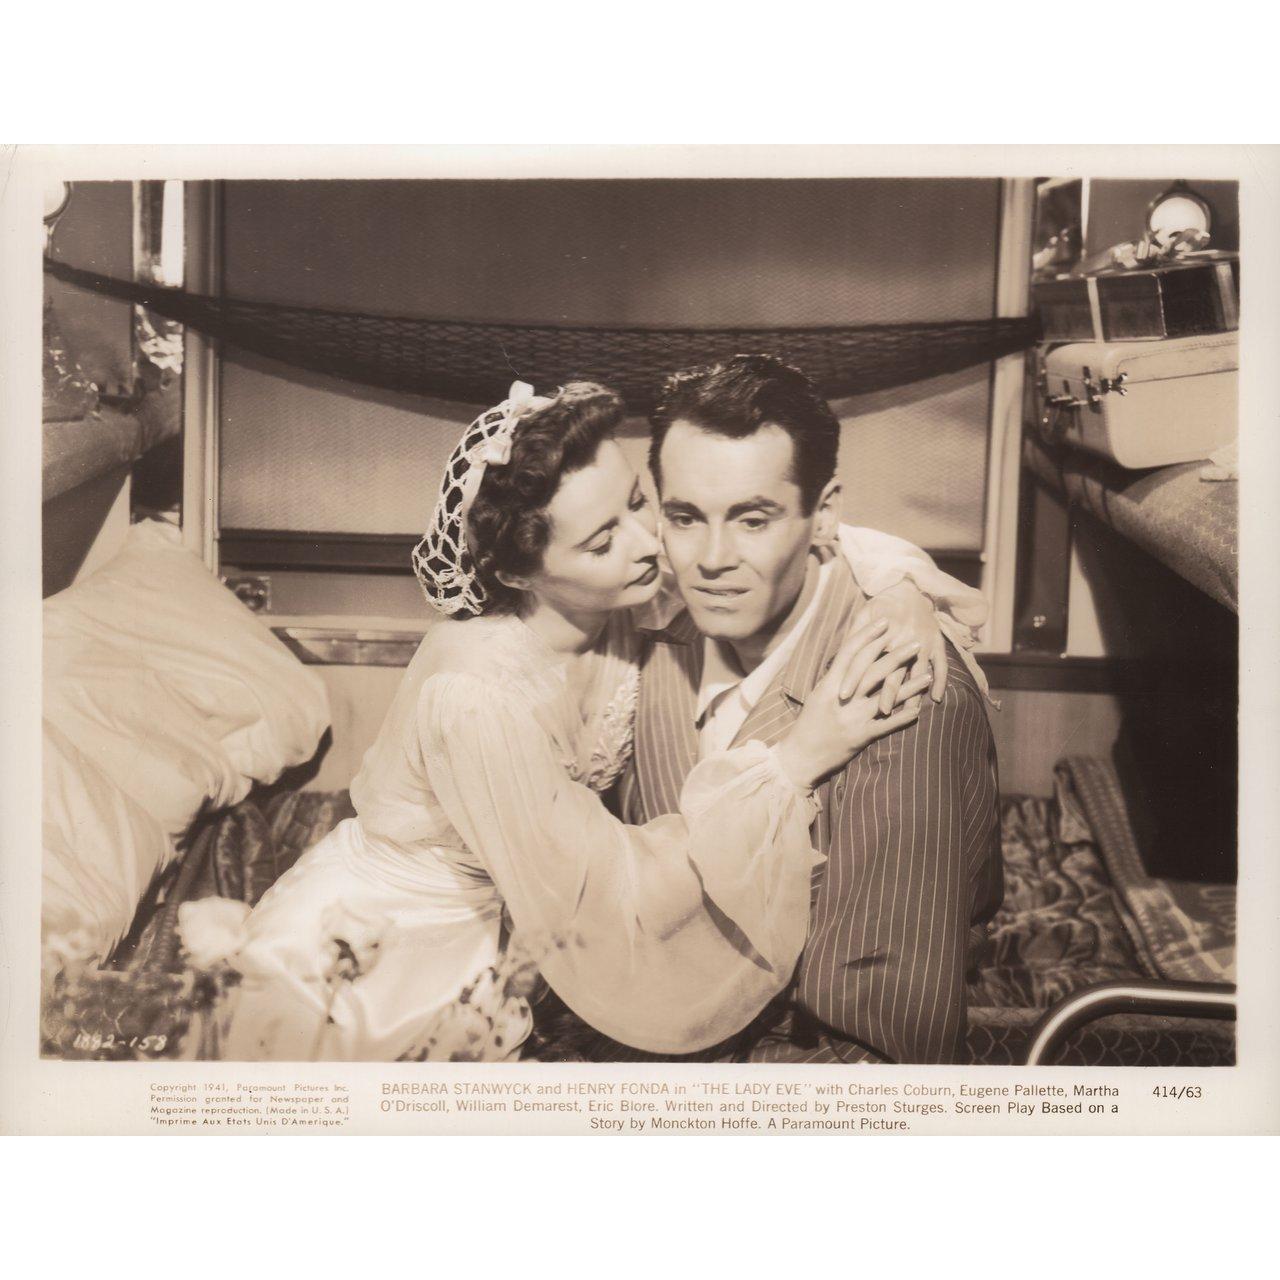 Original 1941 U.S. silver gelatin single-weight photo for the film The Lady Eve directed by Preston Sturges with Barbara Stanwyck / Henry Fonda / Charles Coburn / Eugene Pallette. Very Good-Fine condition. Please note: the size is stated in inches